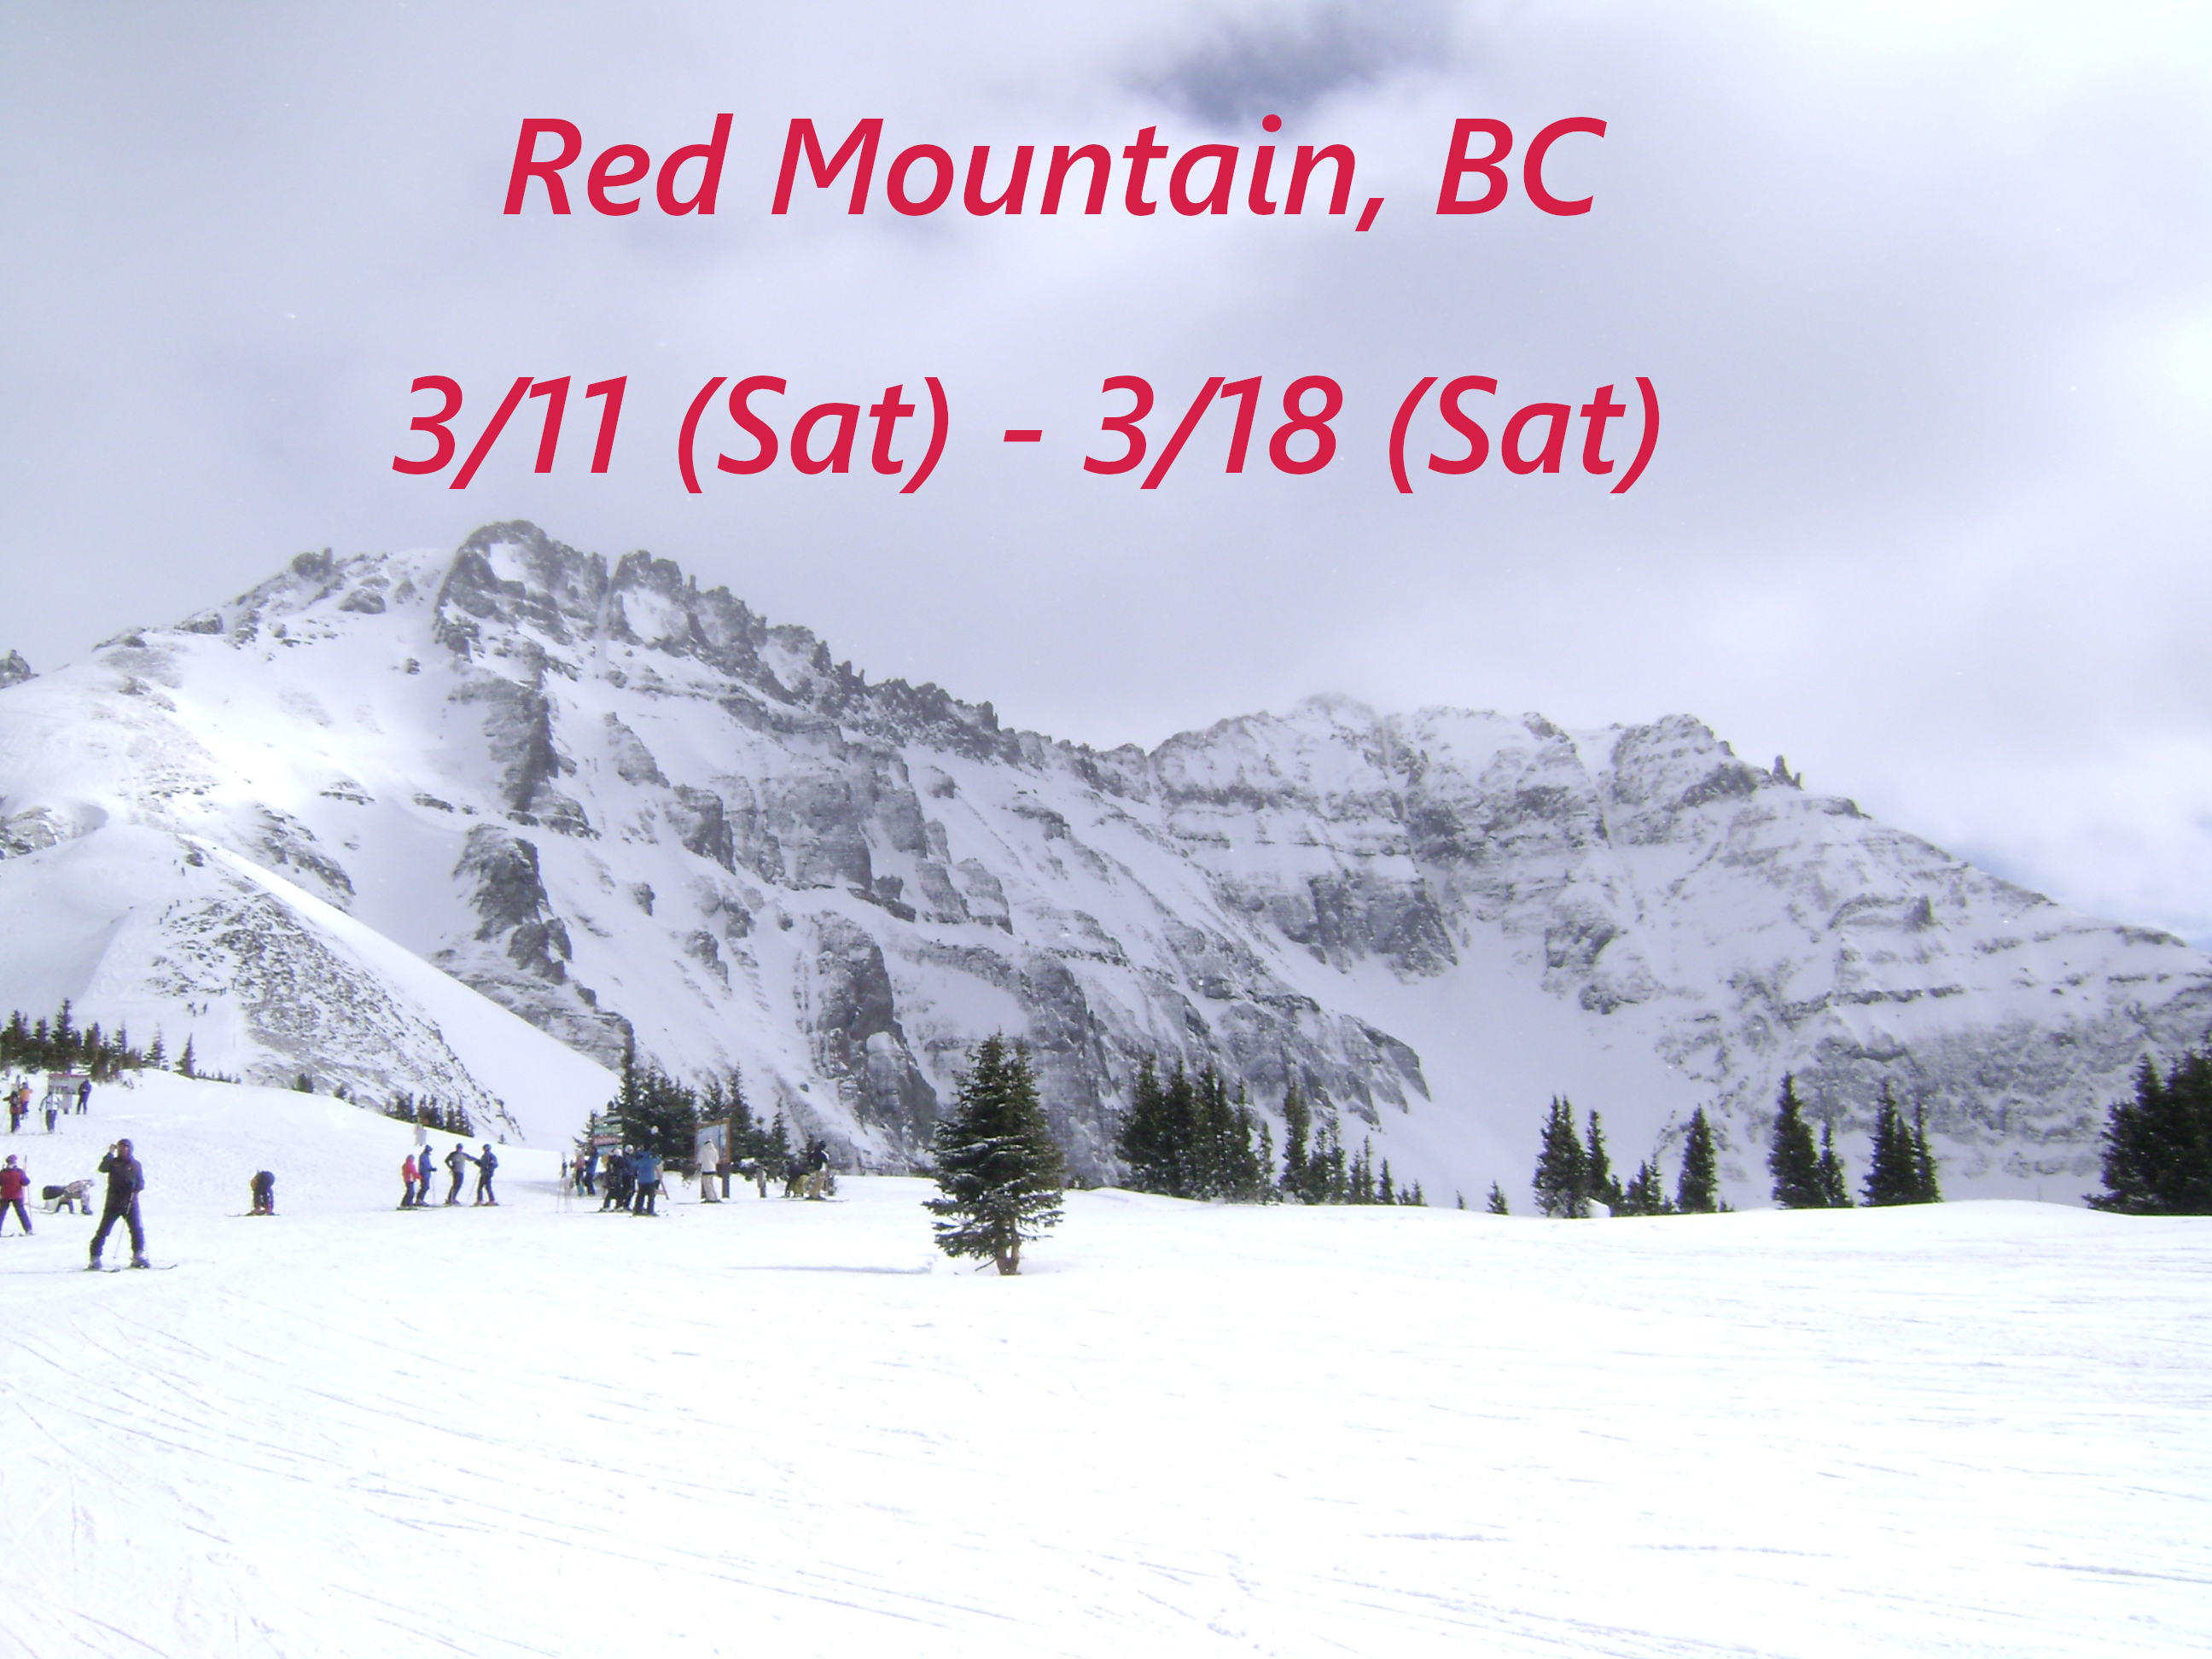 Red Mountain, BC 2023 trip